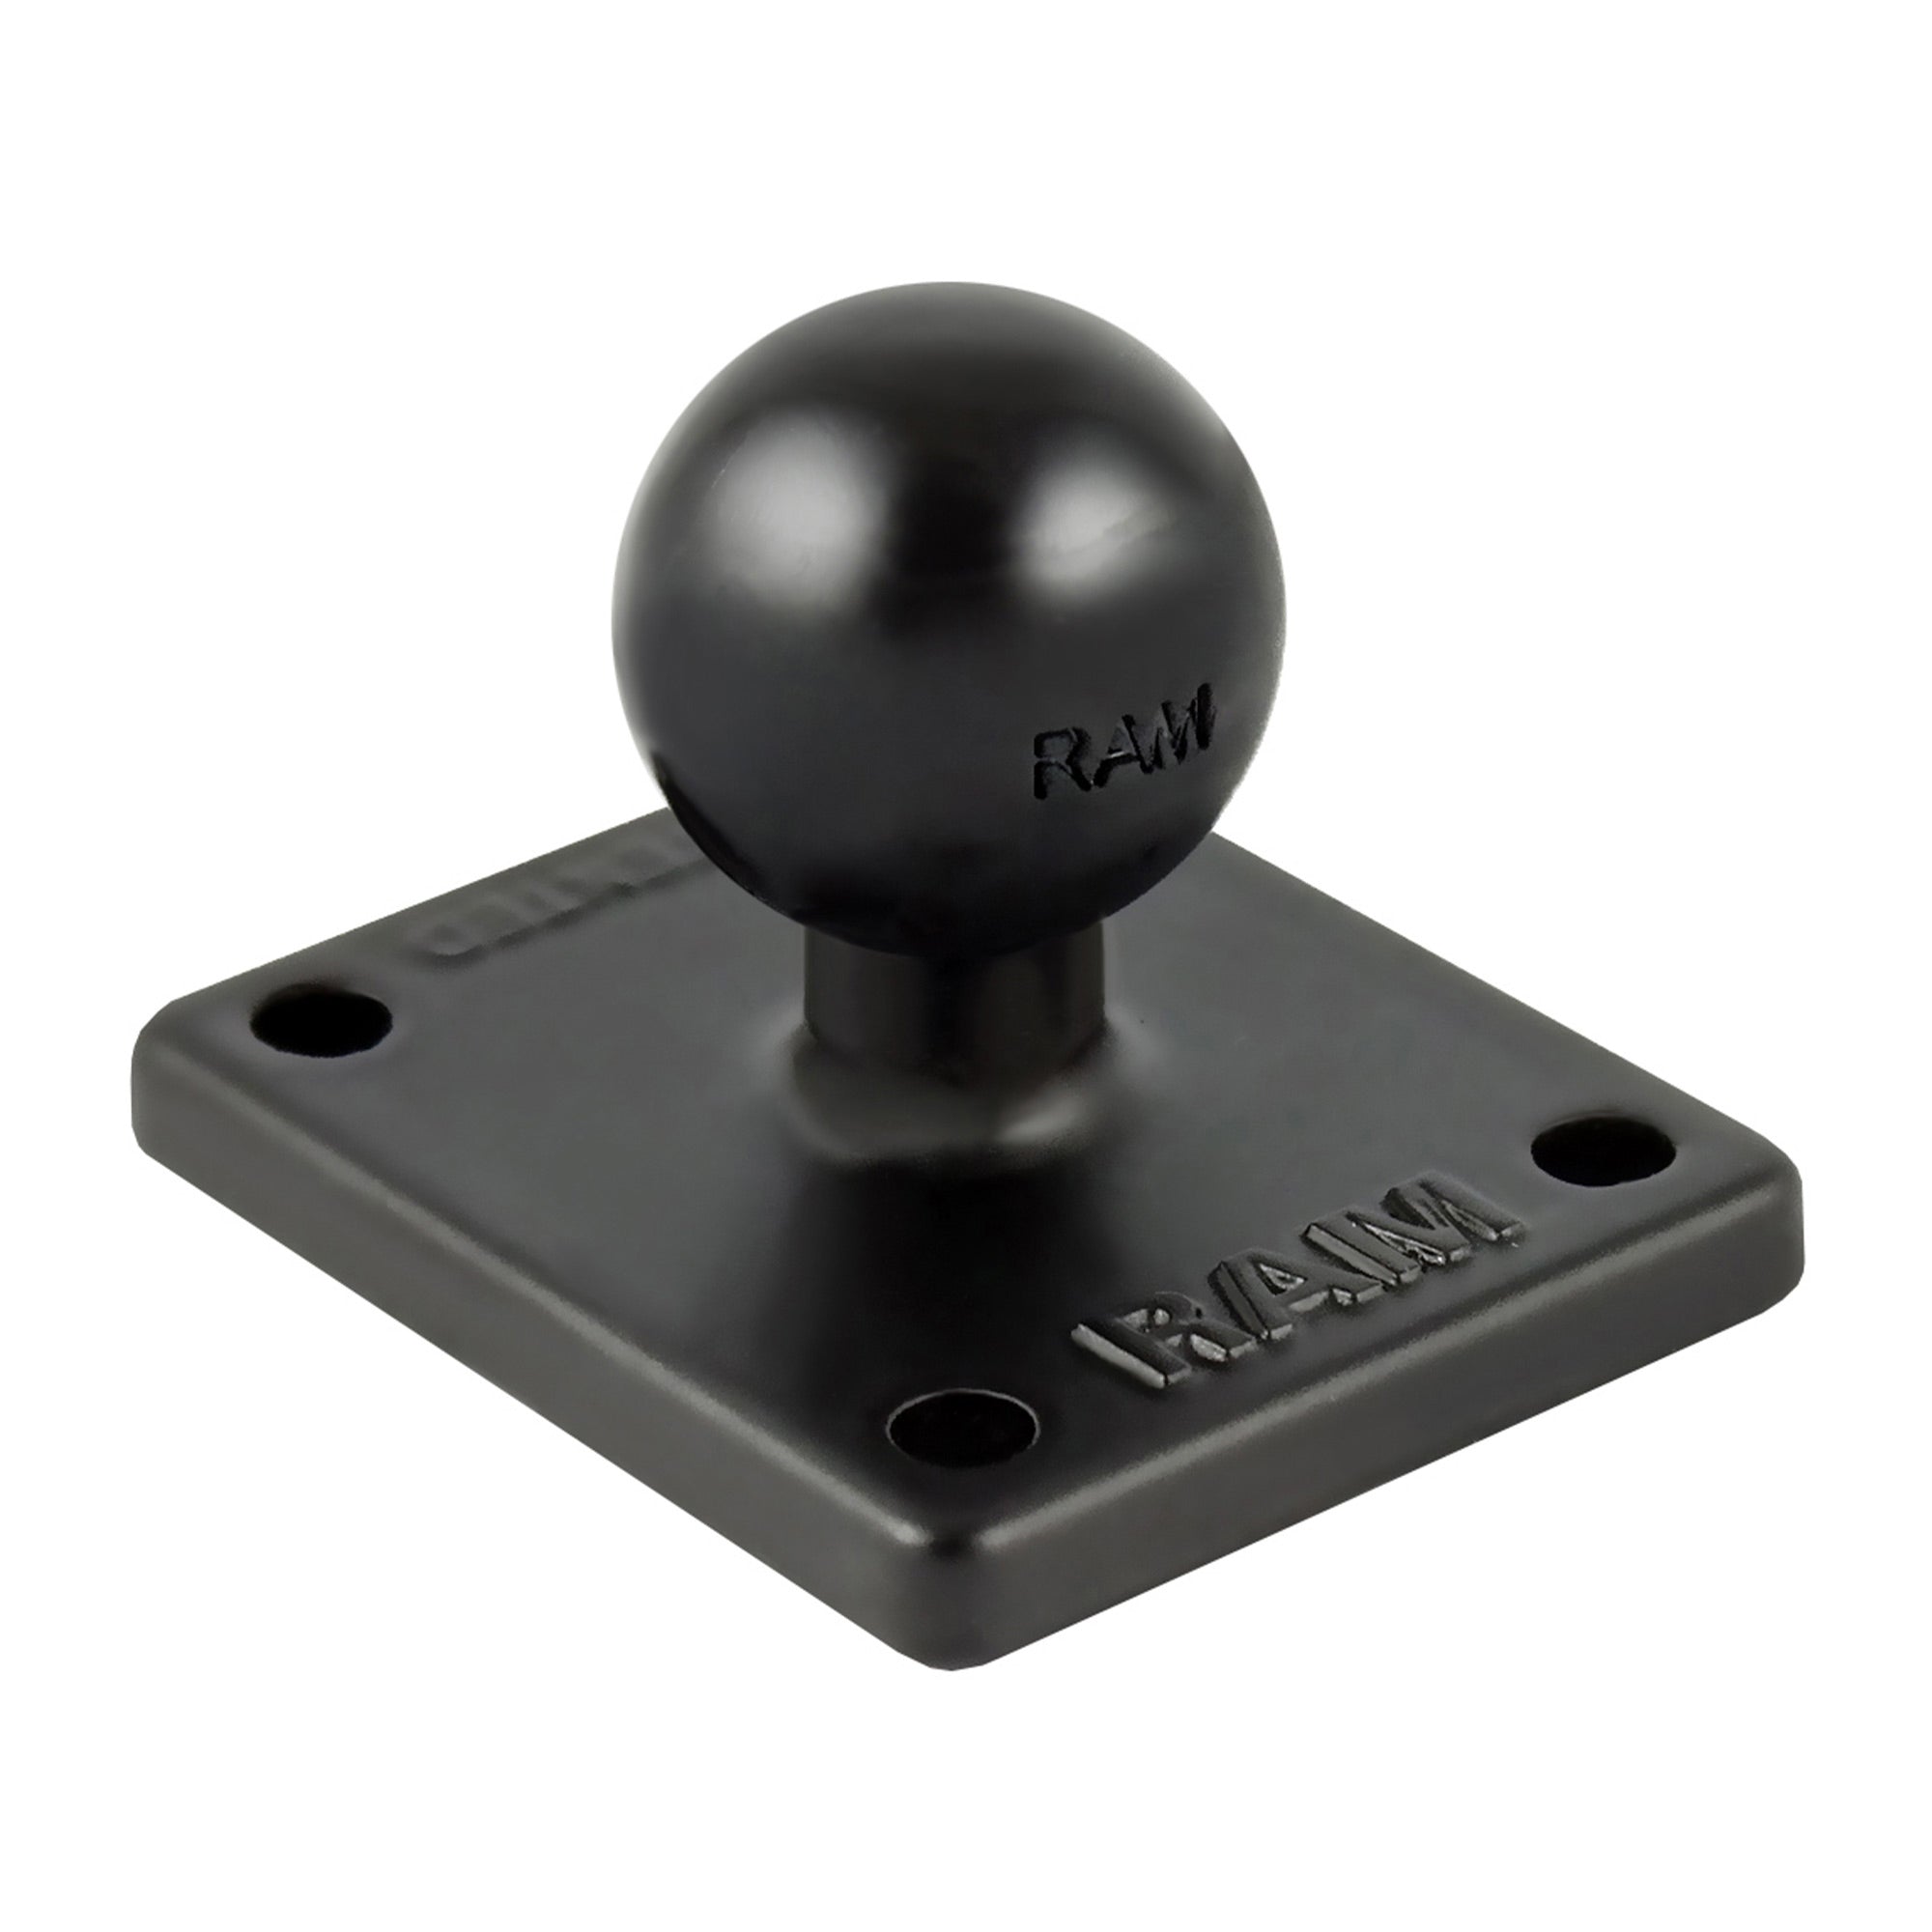 RAM Ball Adapter with AMPS Plate - B-Size - Non-Retail Packaging